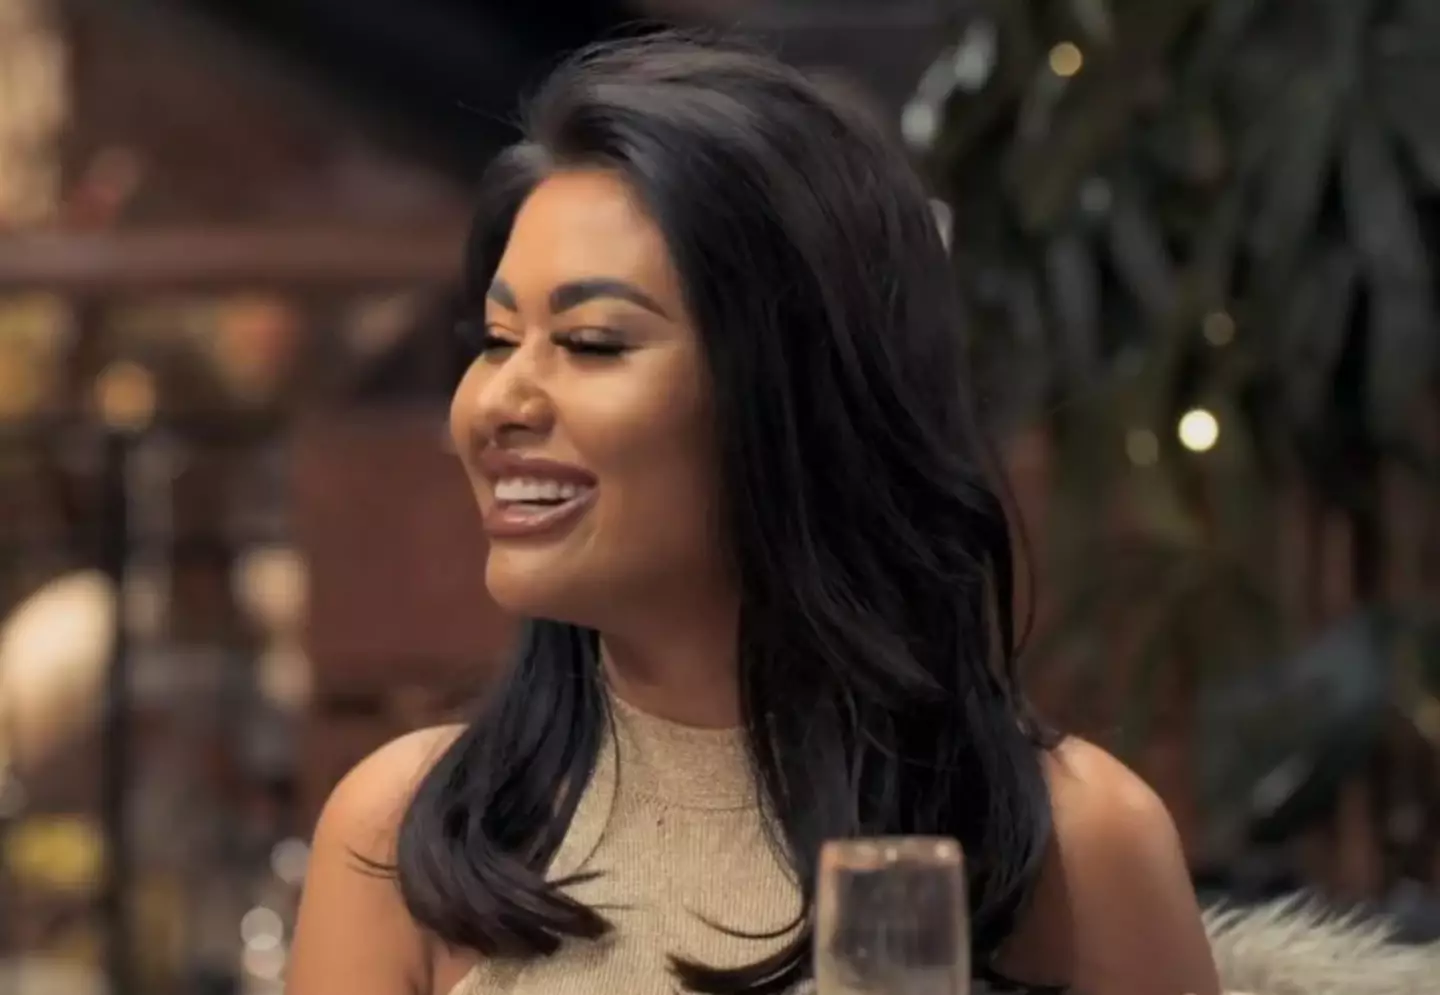 Nikita Jasmine will no longer be part of Married at First Sight (